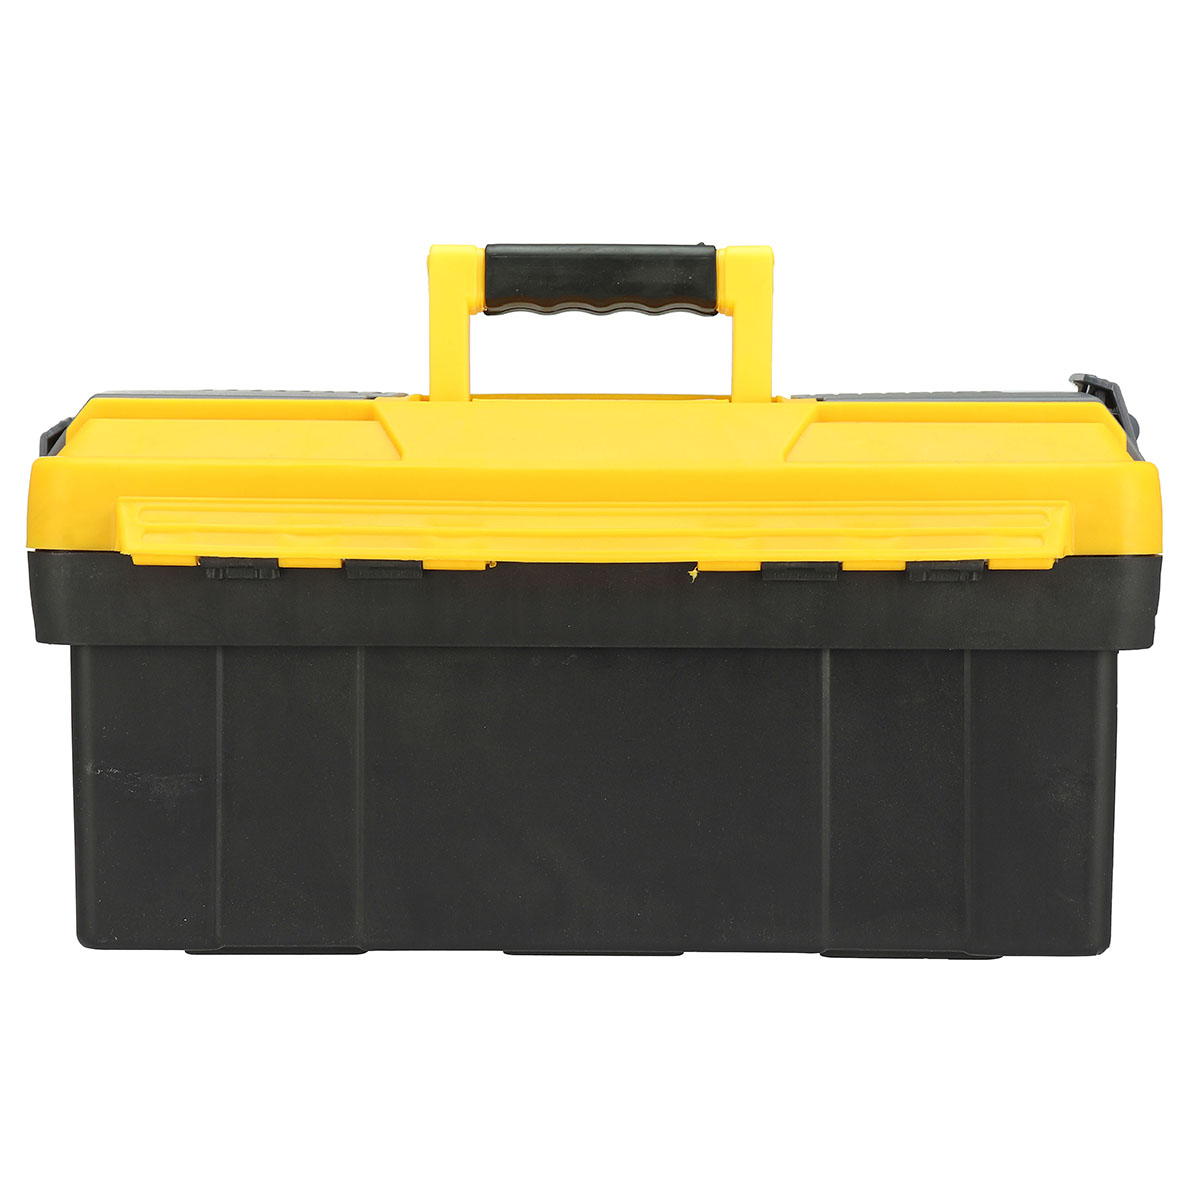 141719-Inch-Plastic-Work-Tools-Storage-Box-Protable-Carrying-Case-Handle-Accessories-Holder-1321332-8